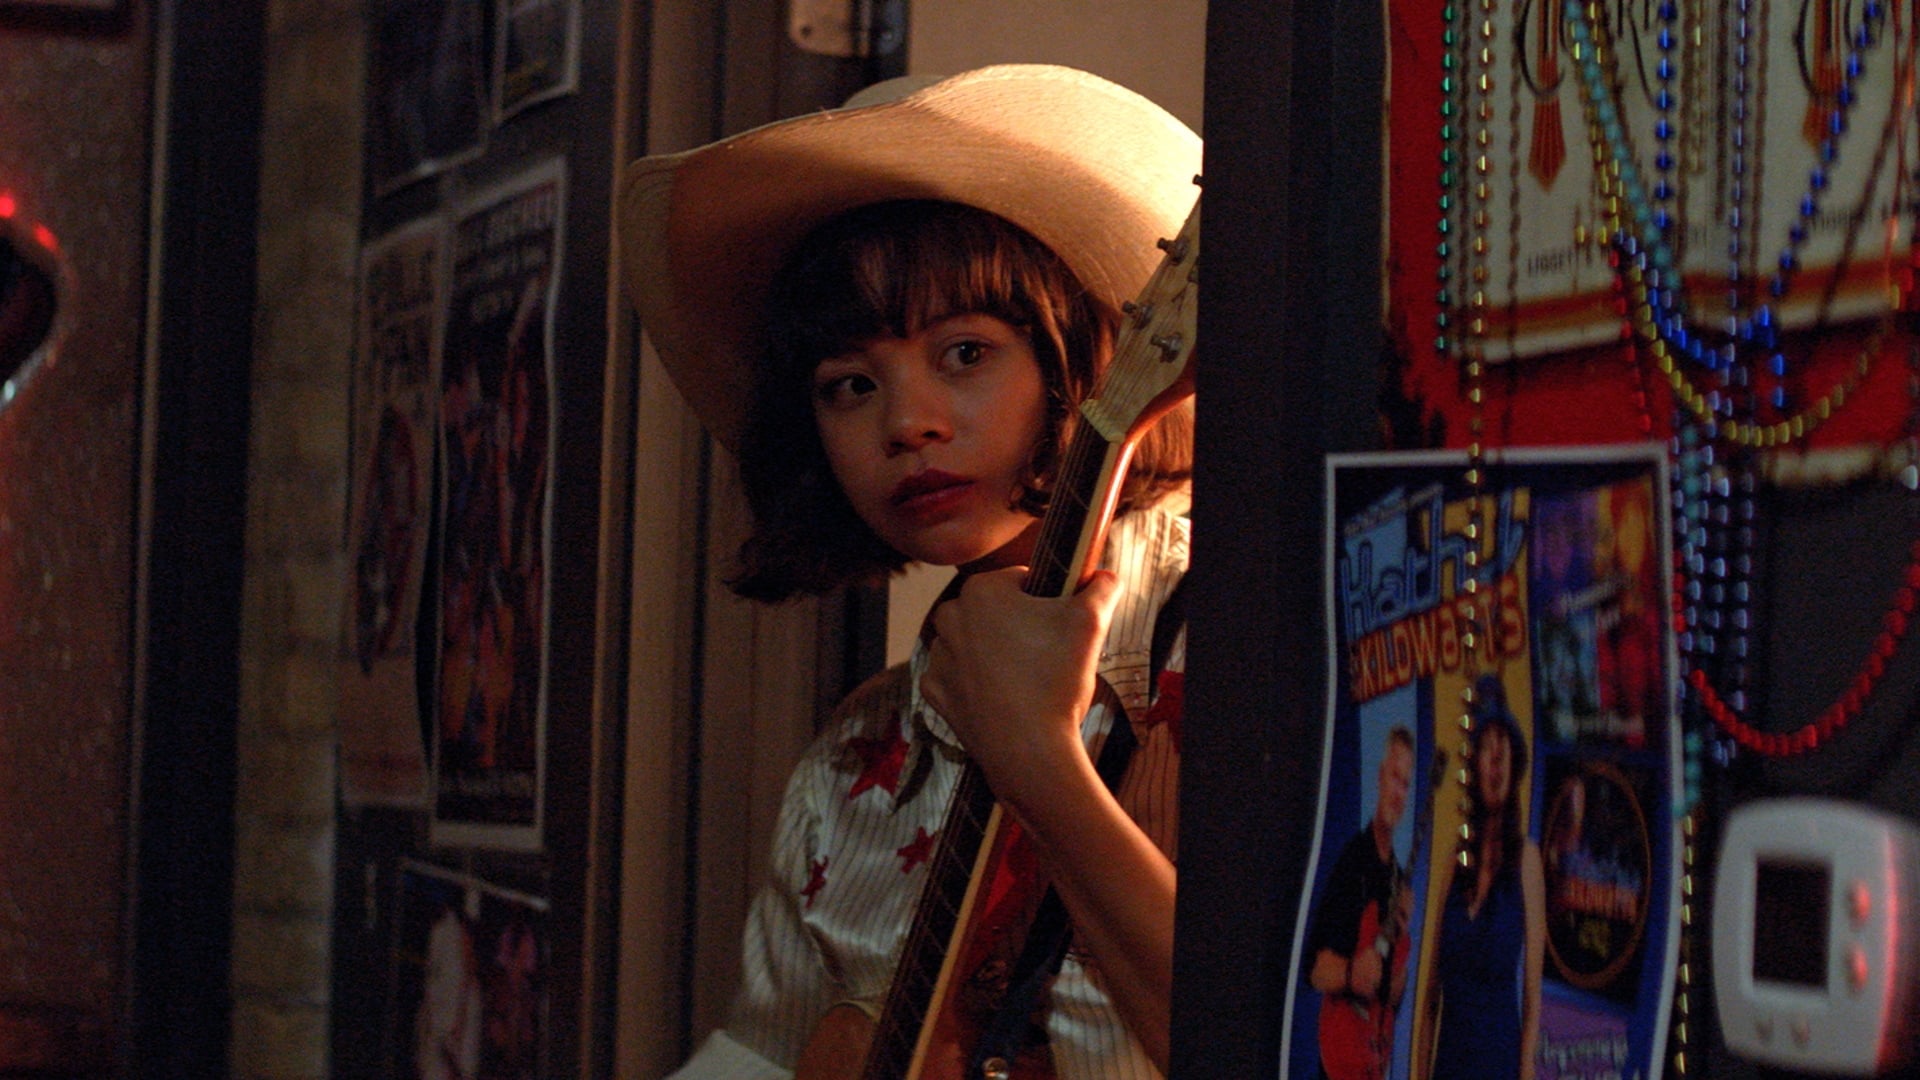 Image from the film 'Yellow Rose' (2019). A teenage girl peers out of a door. She wears a white cowboy hat and a striped button down shirt with red stars. There is an acoustic guitar braced to her chest. On the walls outside the door hang various posters and beaded necklaces.